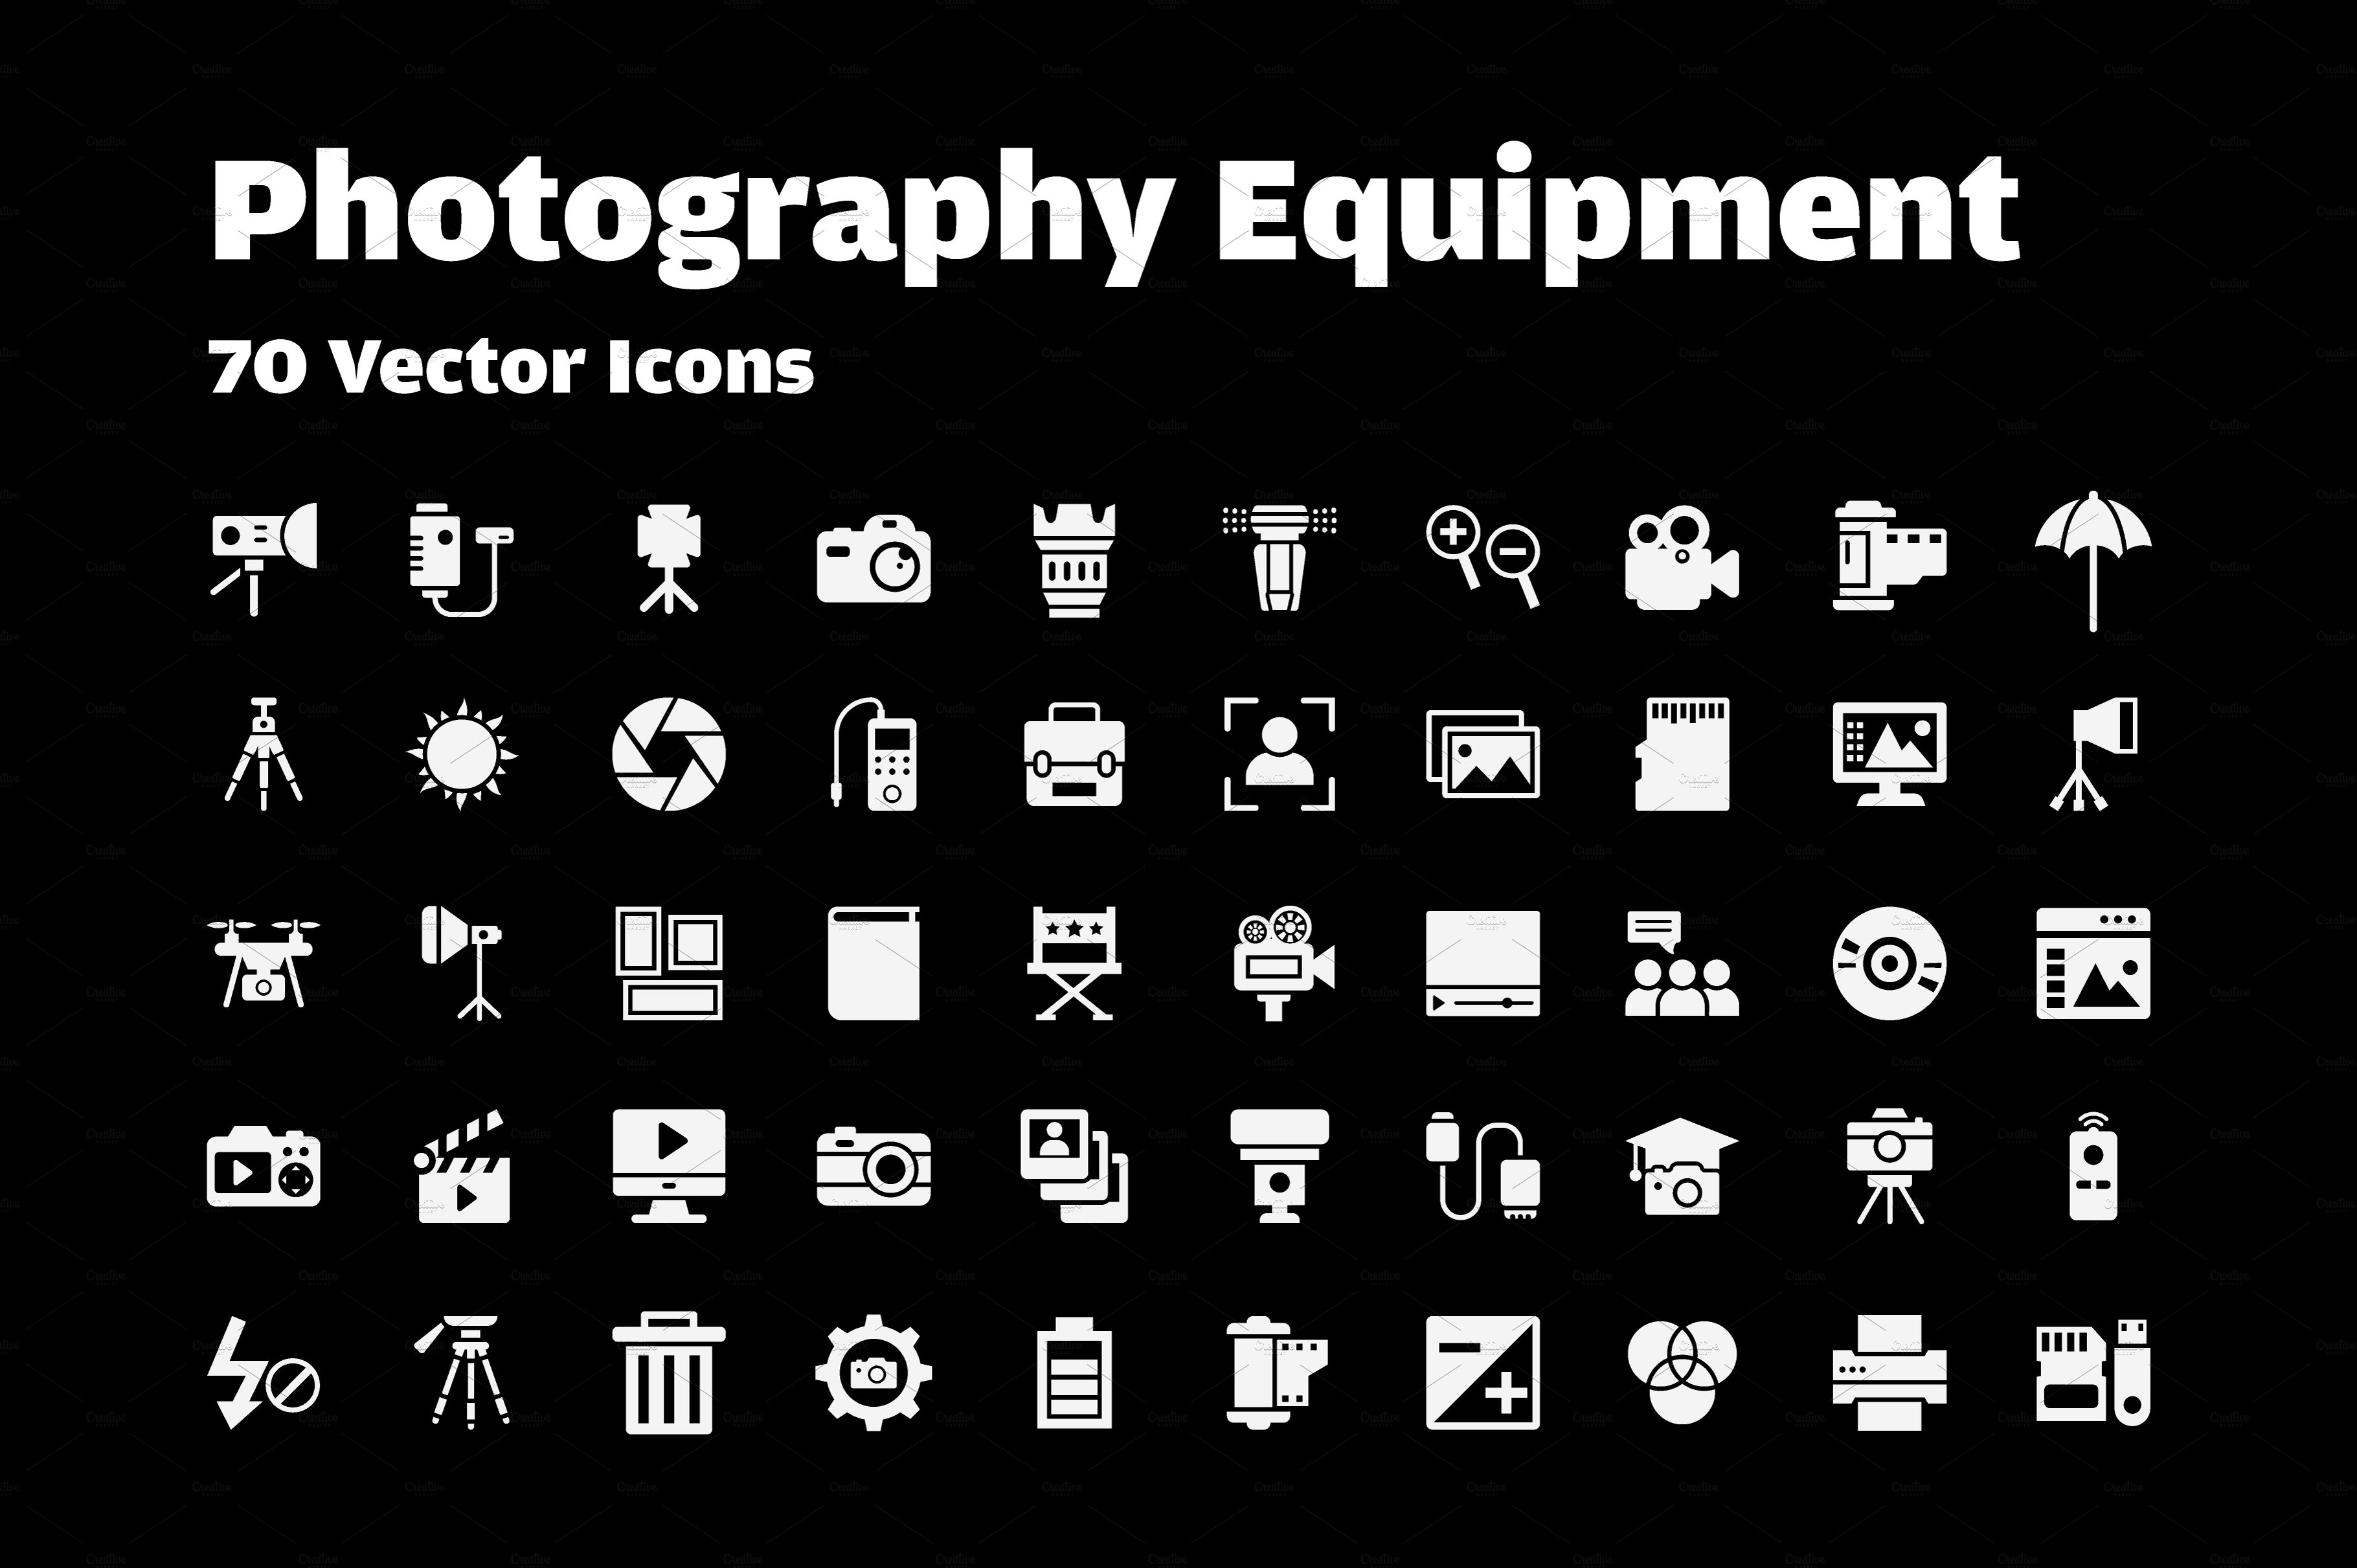 70 Photography Vector Icons cover image.